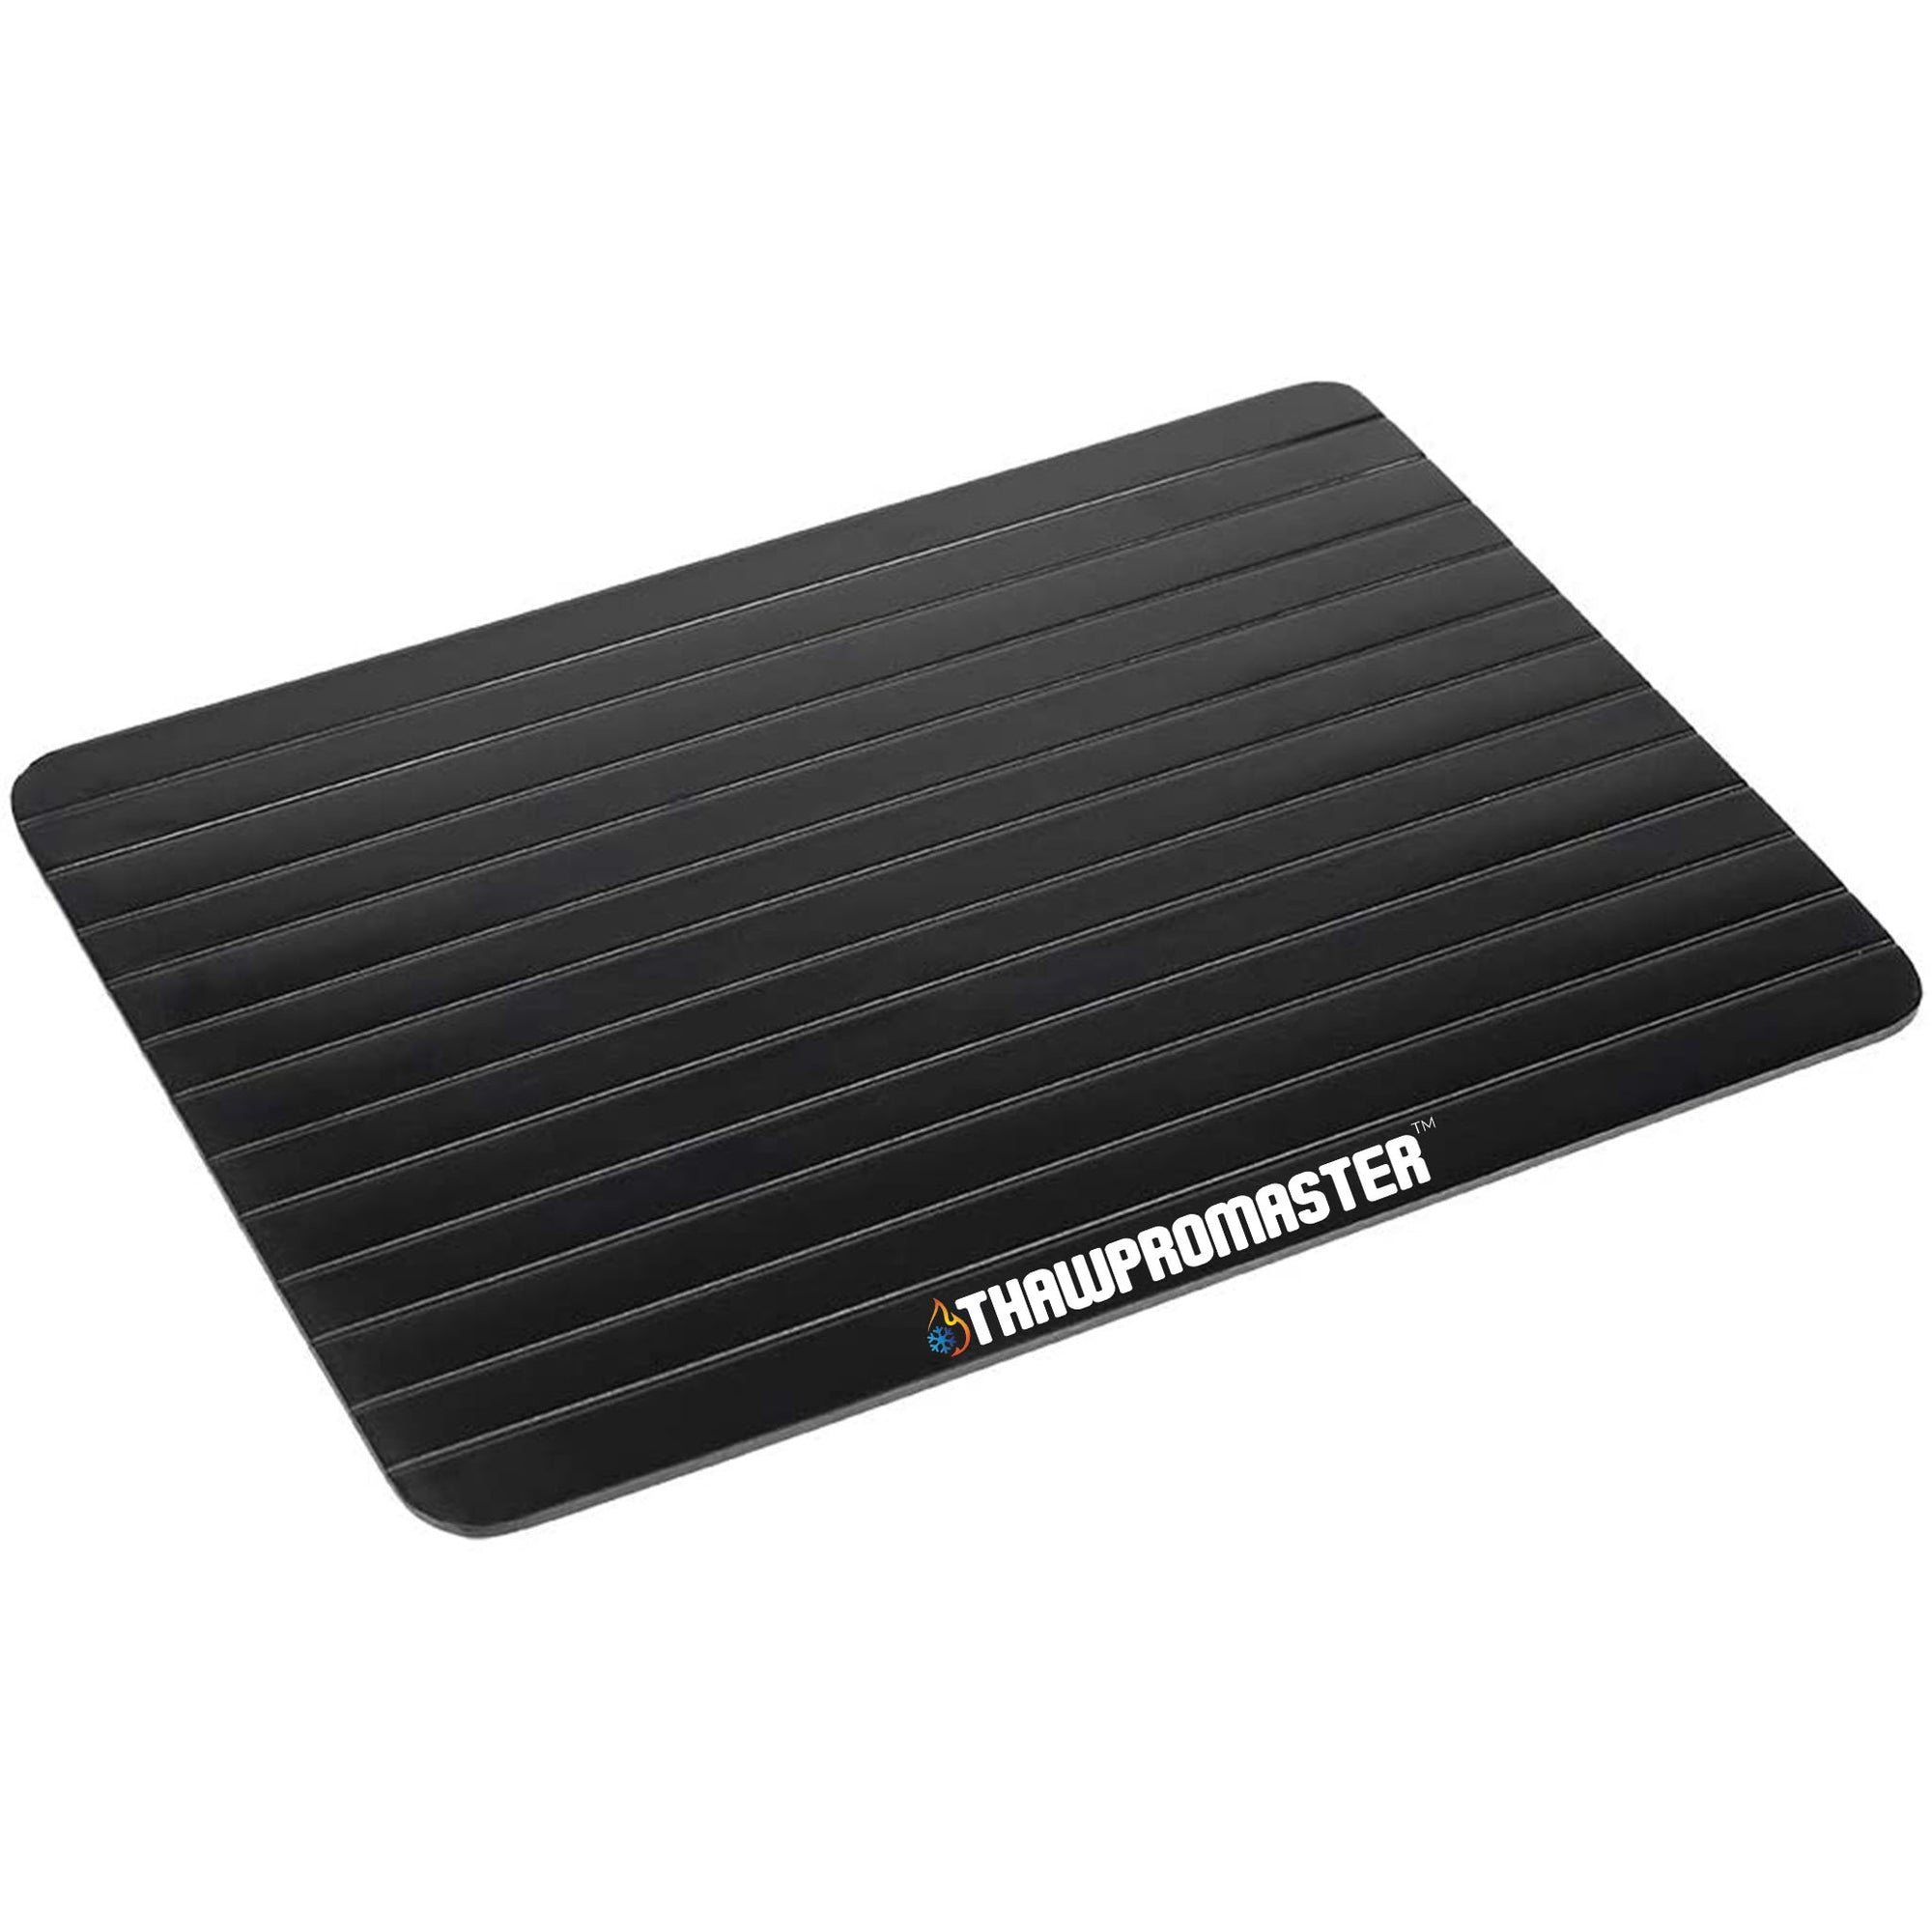 THAWPROMASTER™ - THAW PLATE BLACK EDITION